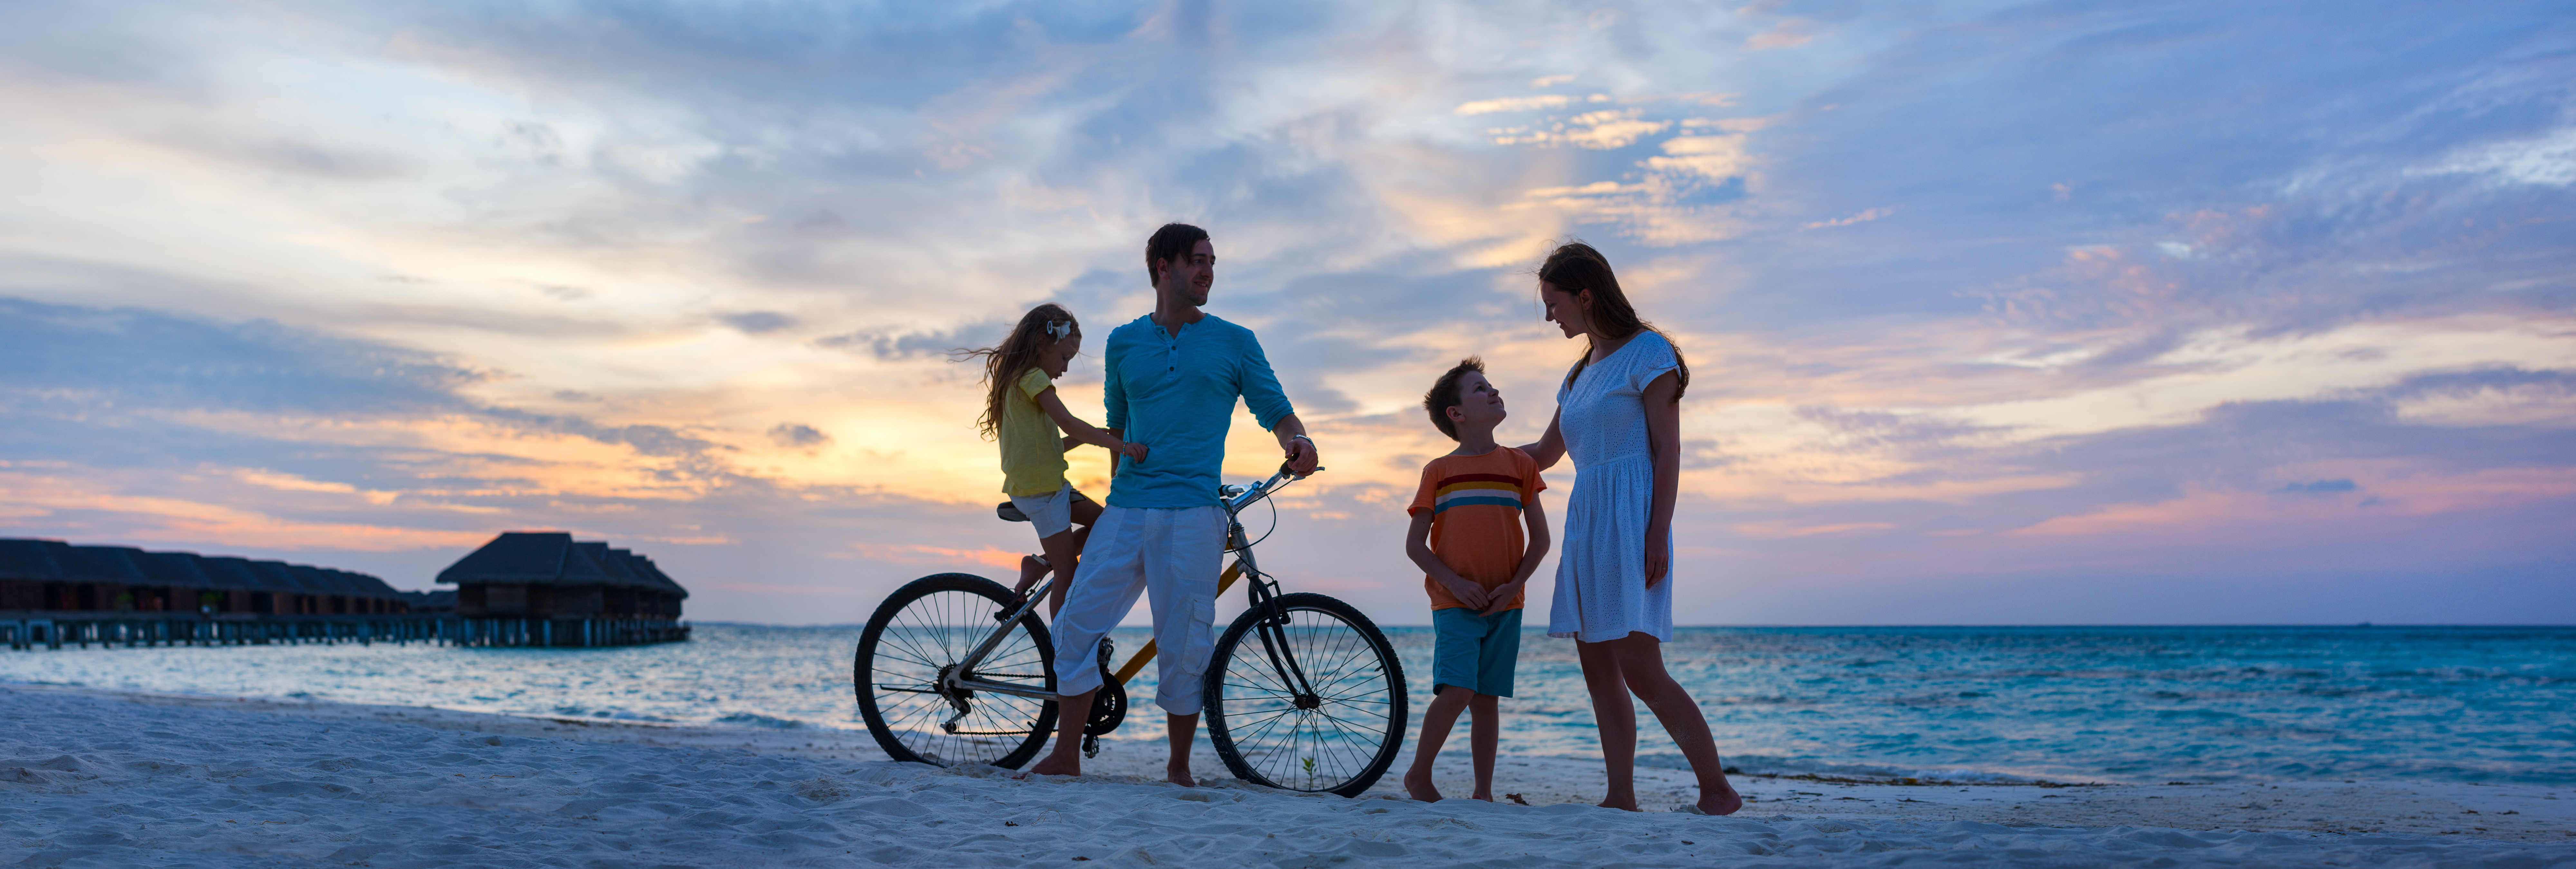 Family with a bike at beach